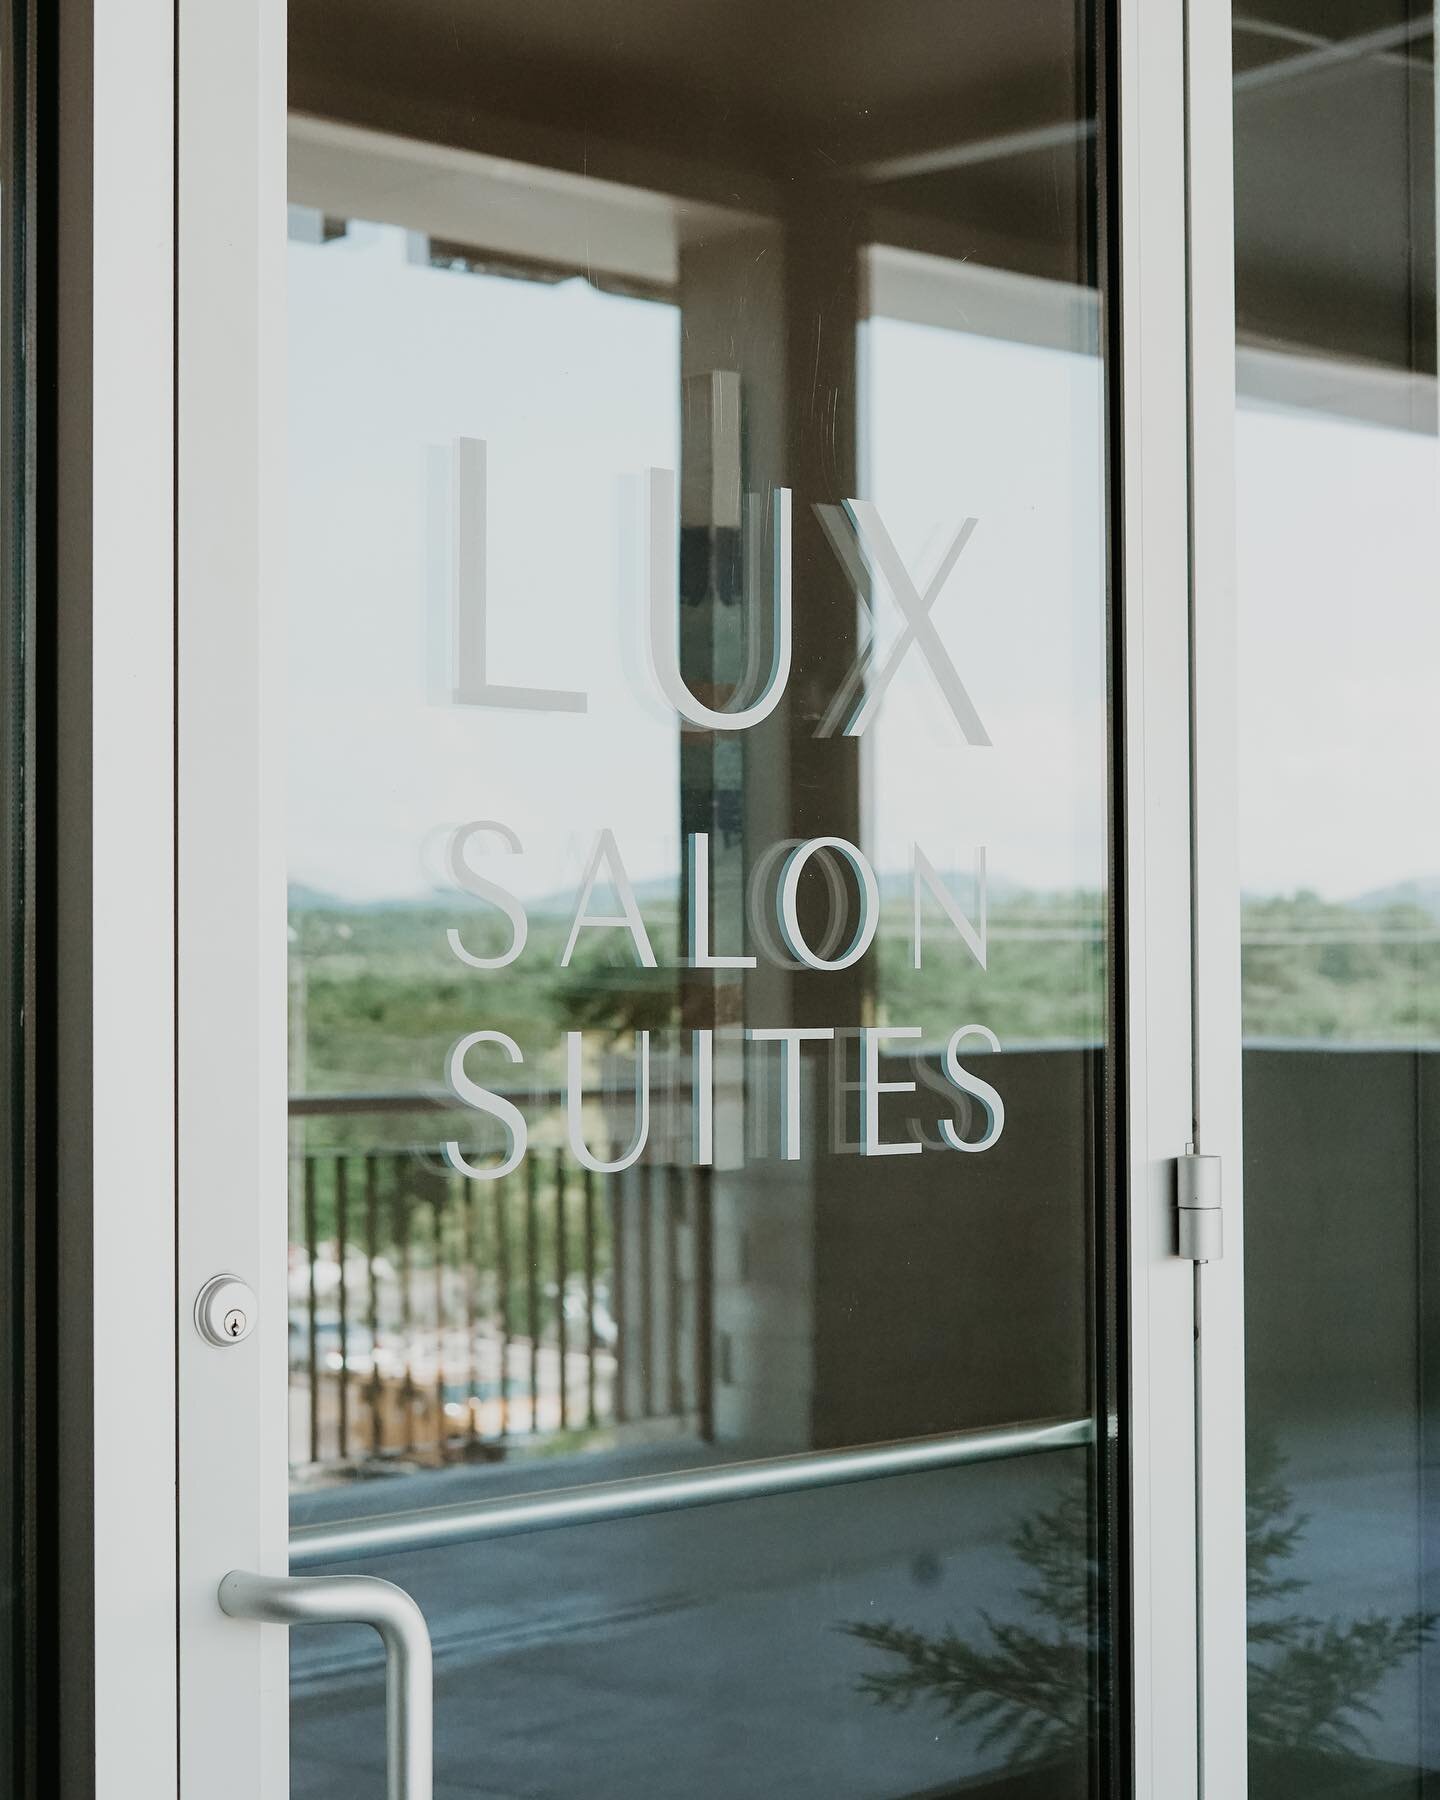 Now scheduling tours at our Madison, Brentwood, and Nolensville locations! To schedule a luxury tour call or email us today! 
jamiesprott@luxsalonsuites.net
615.857.9300
&bull;
&bull;
&bull;
&bull;
&bull;
&bull;
&bull;
&bull;
#luxsalonsuites #hairsty